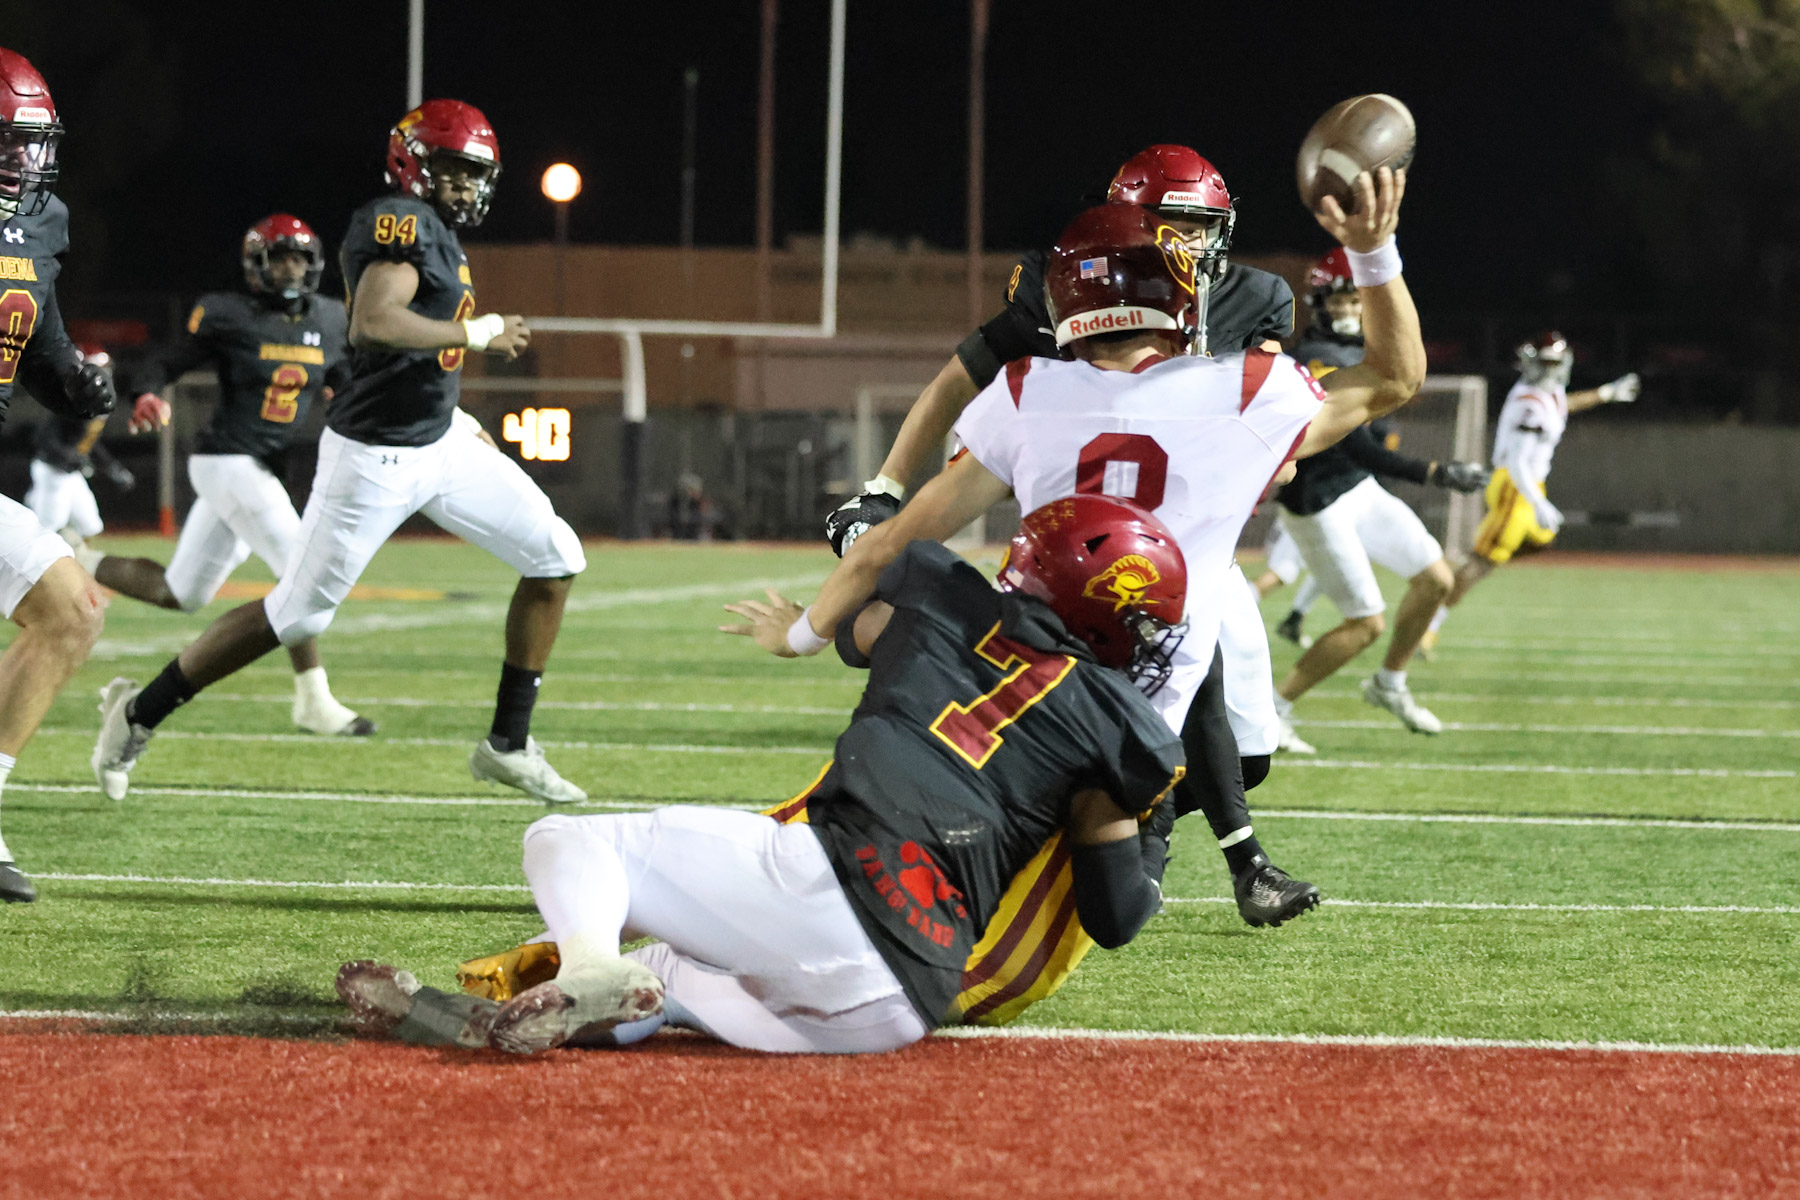 Torriq Brumfield nearly recorded a safety sack on this play during PCC's win v. Glendale (photo by Richard Quinton).